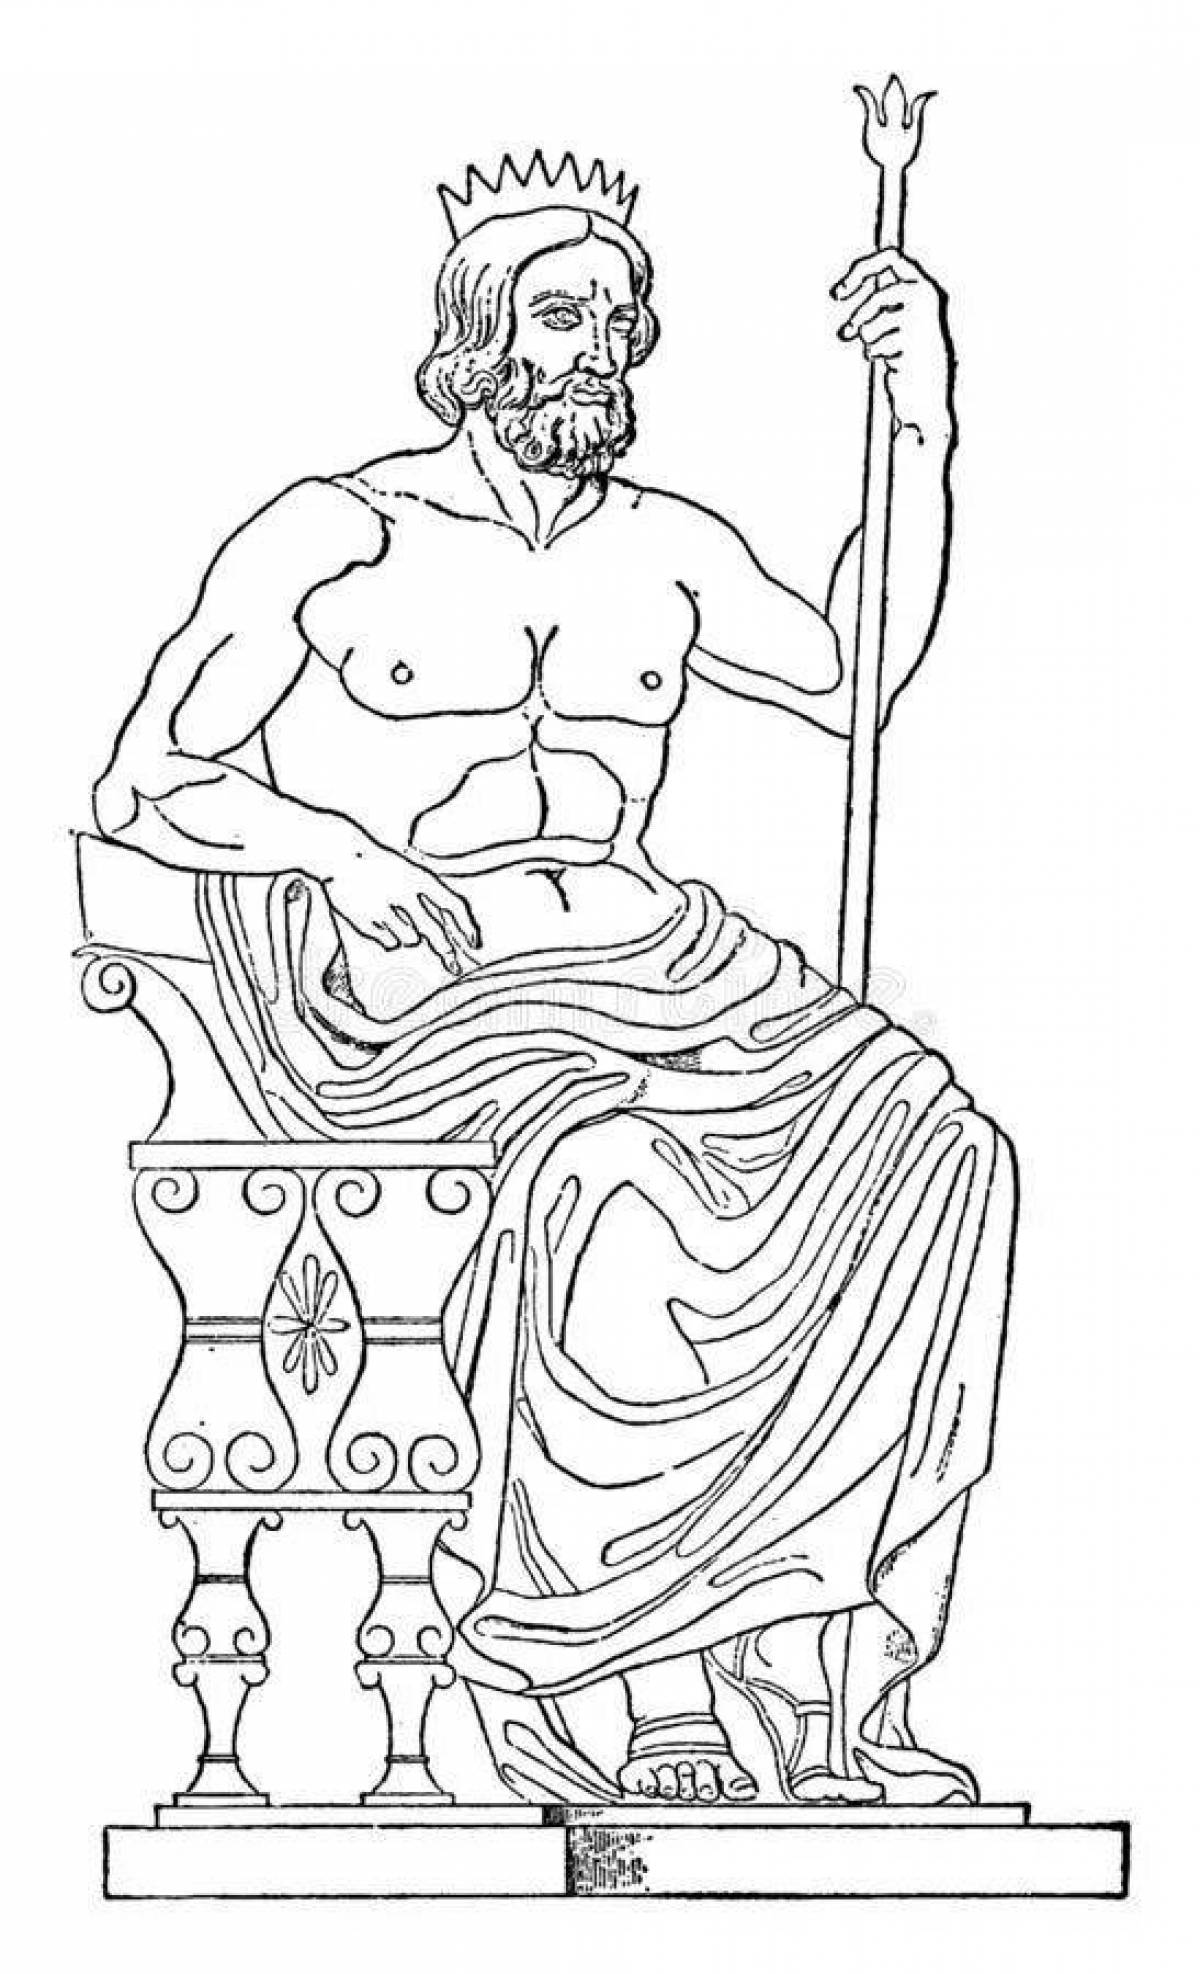 Awesome god of hades coloring page